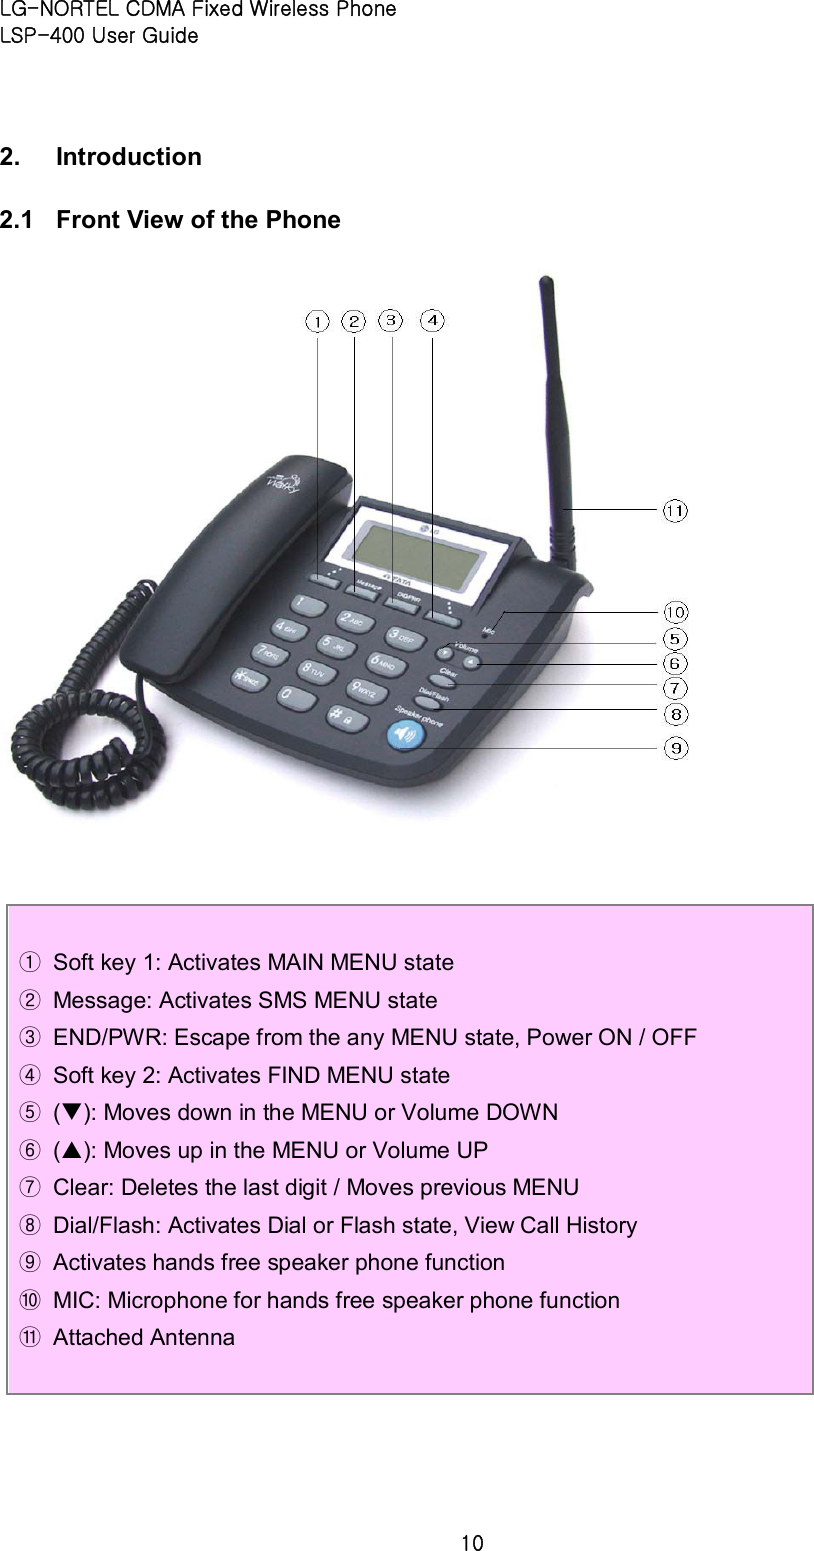 LG-NORTEL CDMA Fixed Wireless Phone   LSP-400 User Guide 10 2.  Introduction   2.1  Front View of the Phone     ①  Soft key 1: Activates MAIN MENU state   ②  Message: Activates SMS MENU state   ③  END/PWR: Escape from the any MENU state, Power ON / OFF   ④  Soft key 2: Activates FIND MENU state   ⑤  (q): Moves down in the MENU or Volume DOWN   ⑥  (p): Moves up in the MENU or Volume UP   ⑦  Clear: Deletes the last digit / Moves previous MENU   ⑧  Dial/Flash: Activates Dial or Flash state, View Call History   ⑨  Activates hands free speaker phone function   ⑩  MIC: Microphone for hands free speaker phone function   ⑪  Attached Antenna  